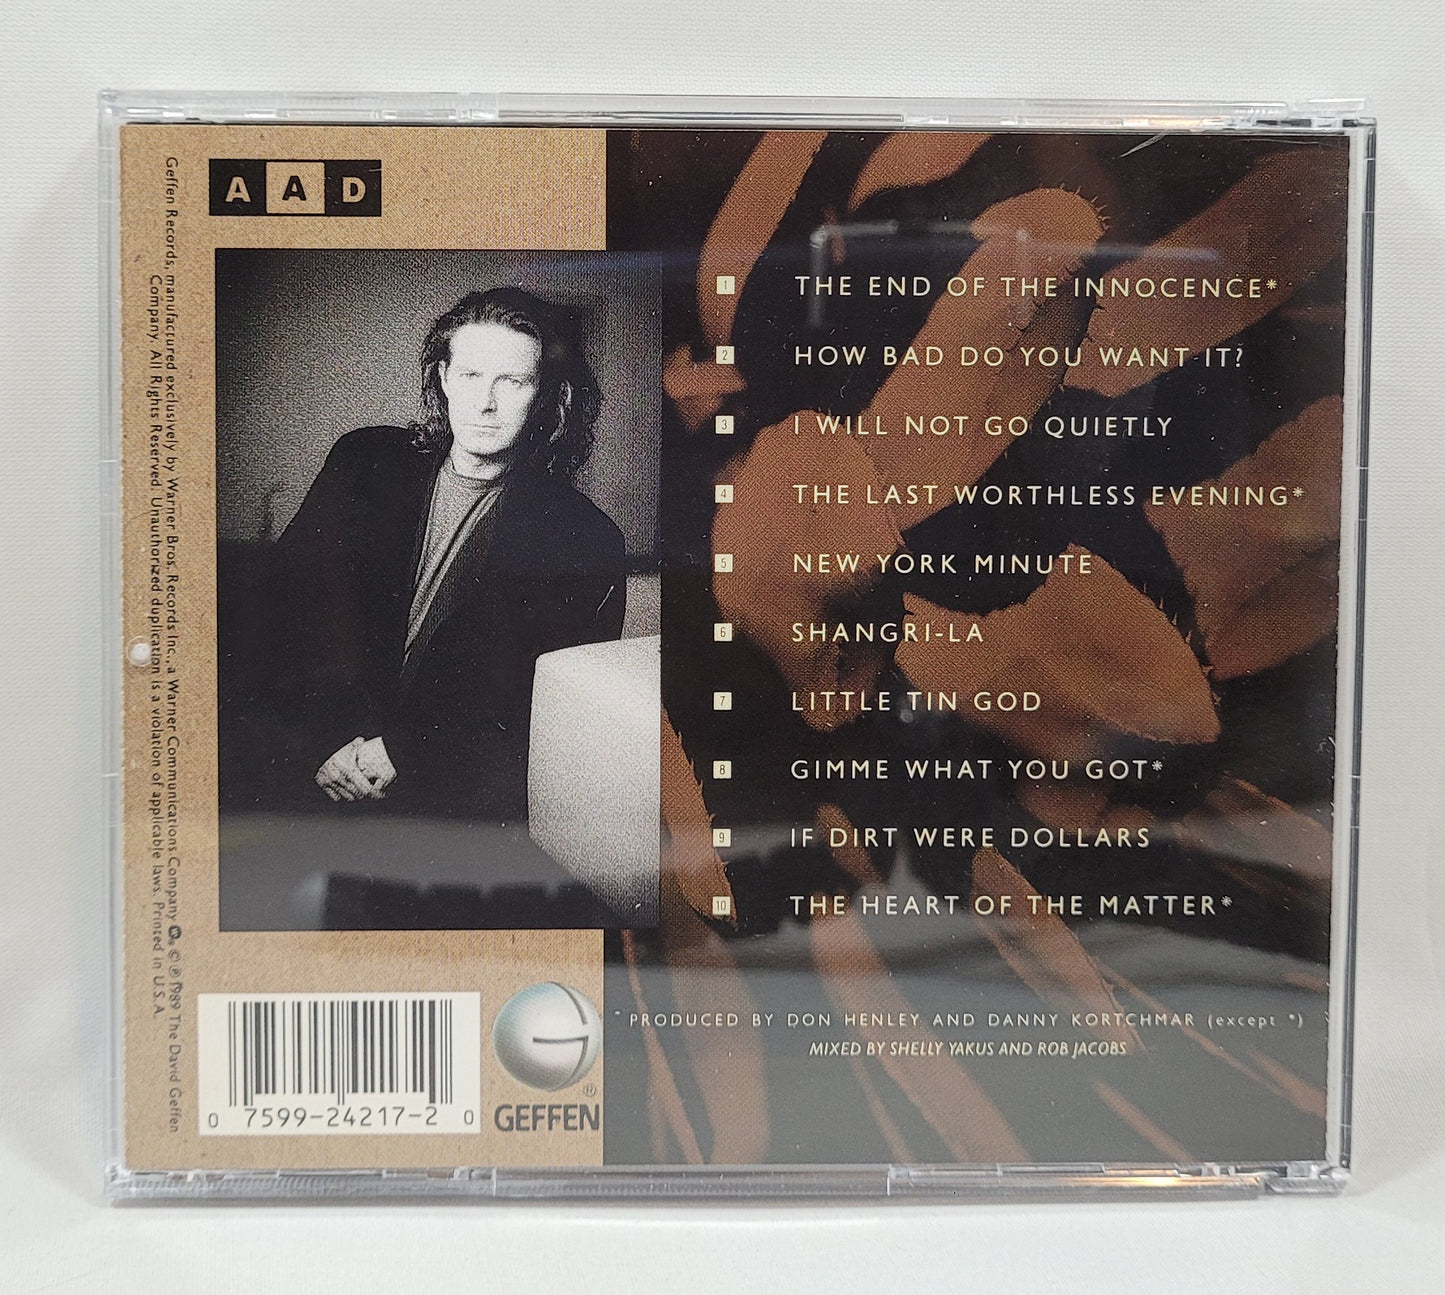 Don Henley - The End of the Innocence [CD] [B]